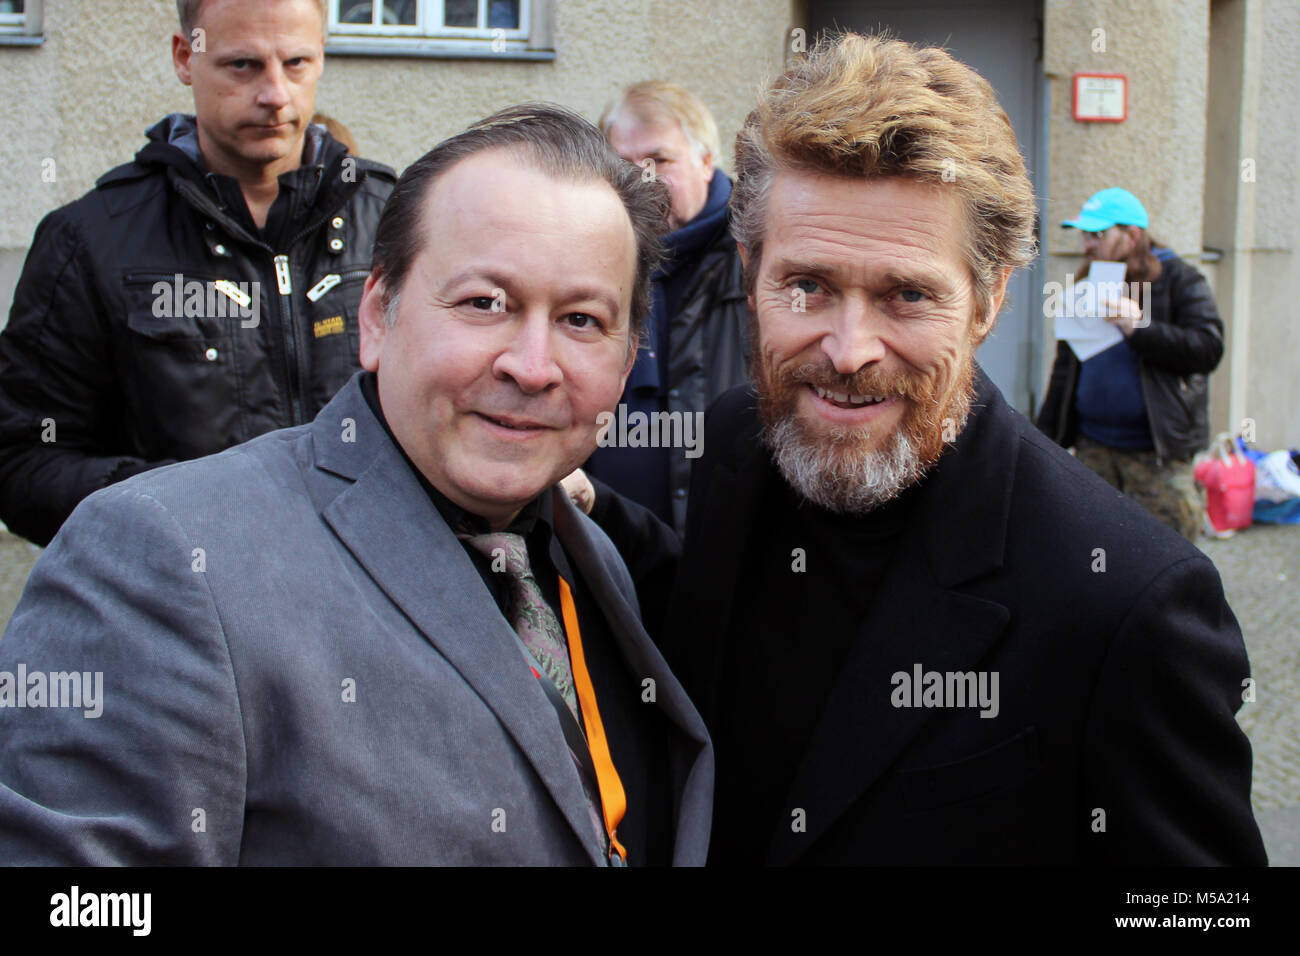 Berlin, Germany. 21st February, 2018. 68th BERLINALE, Where: Berlin/Germany, When:,  Featuring: Willem Dafoe, Tahsin Ocak, When: 20th February 2018, “Credits: T.O.Pictures / Alamy Live News“ Stock Photo